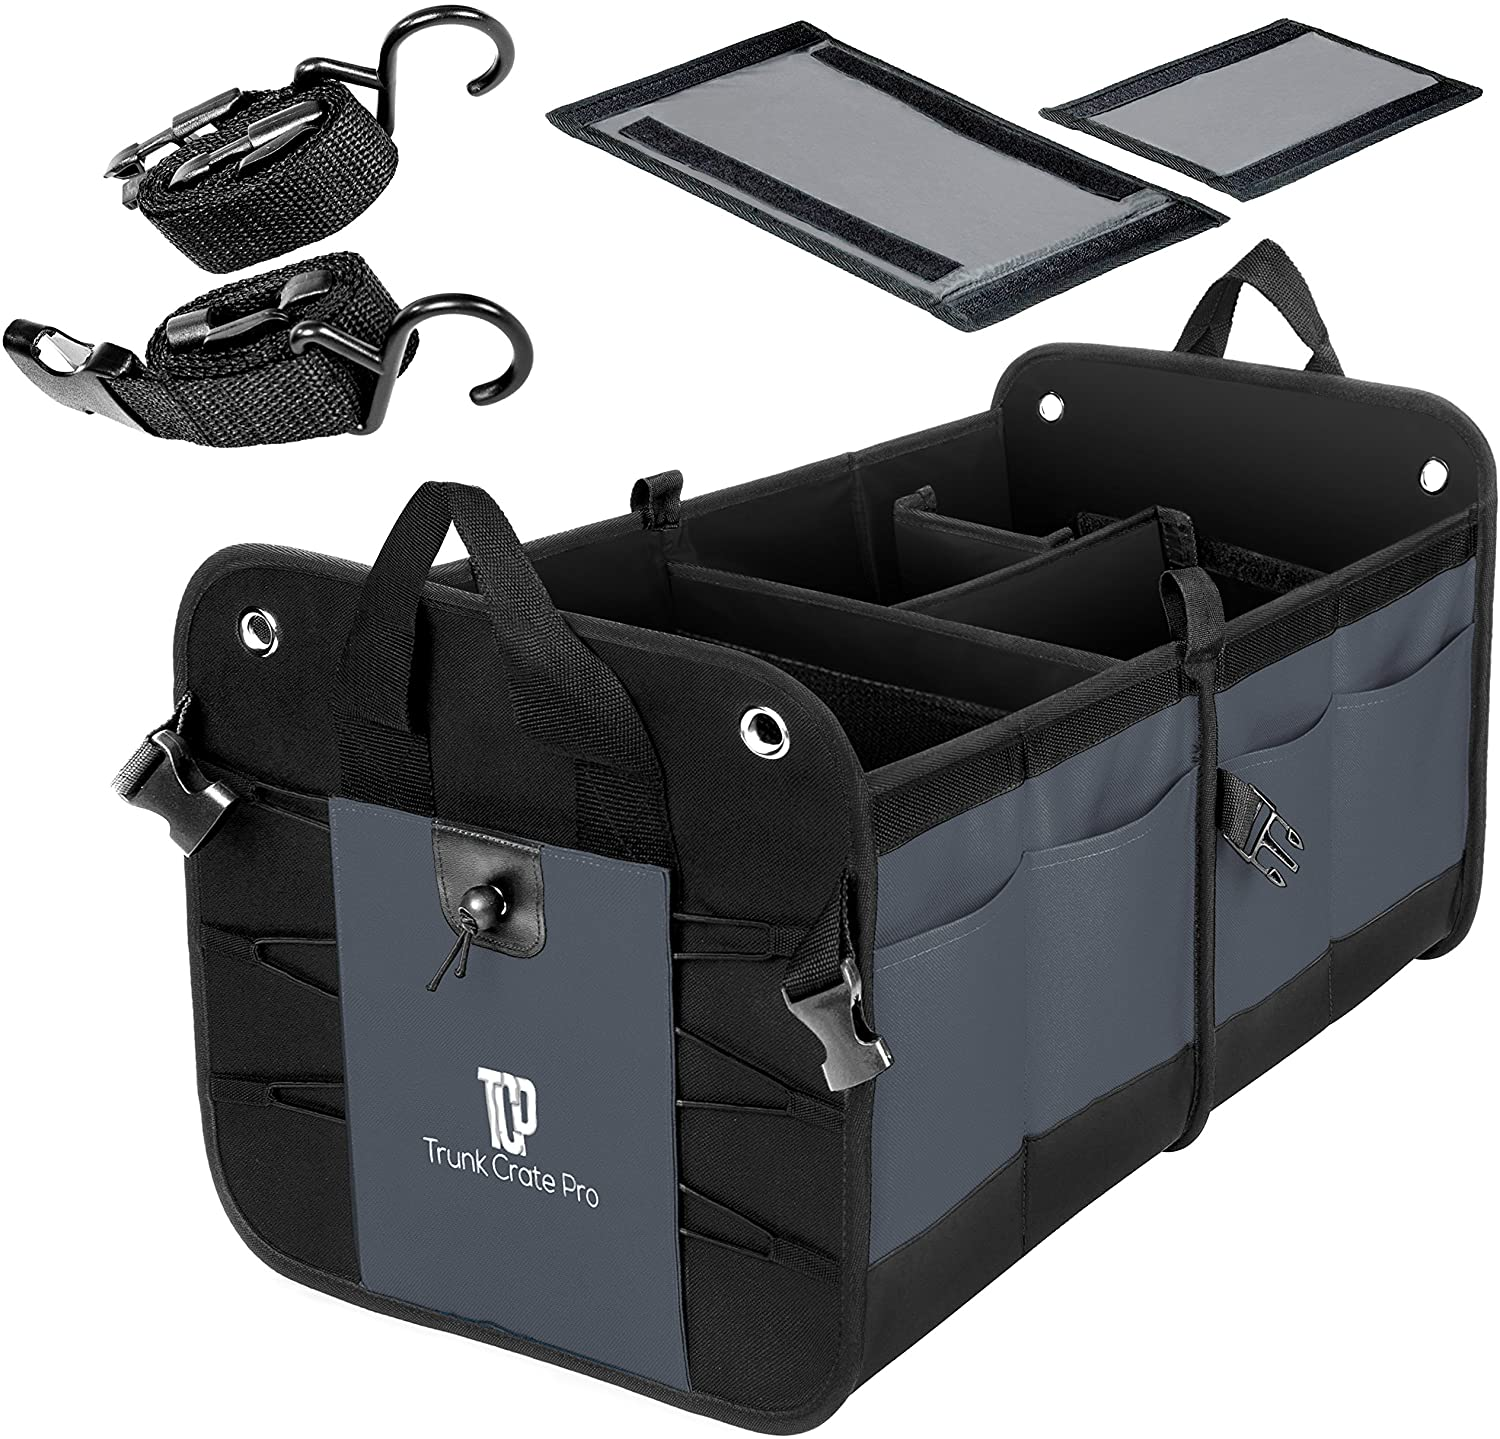 Trunkcratepro Premium Multi Compartments Collapsible Portable Trunk Or –  USA Camp Gear